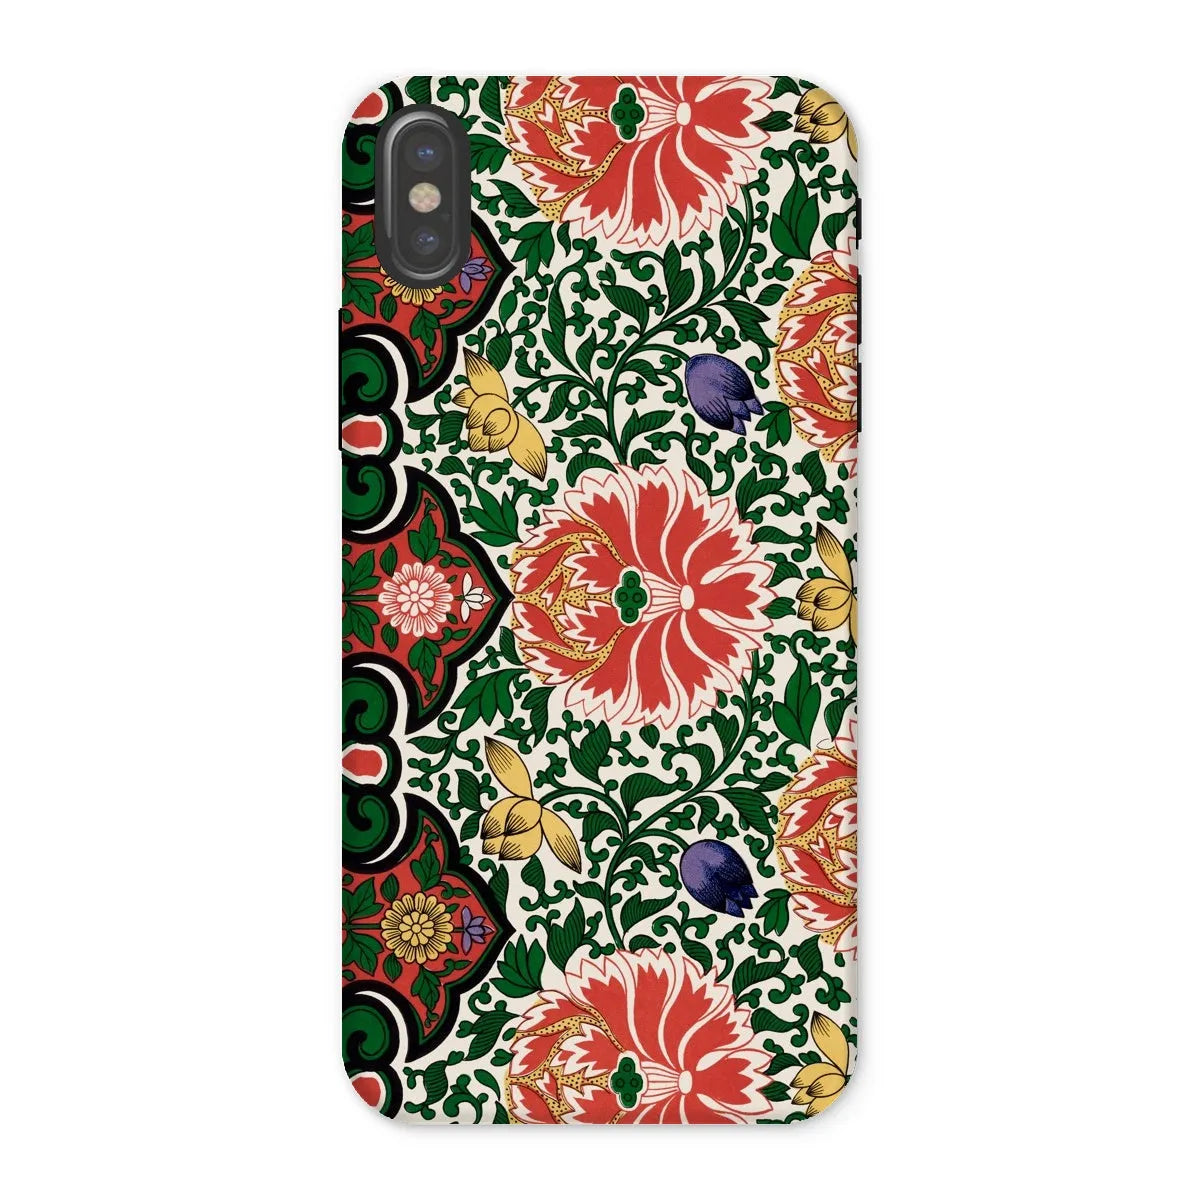 Chinese Floral Pattern Aesthetic Art Phone Case - Owen Jones - Iphone x / Matte - Mobile Phone Cases - Aesthetic Art